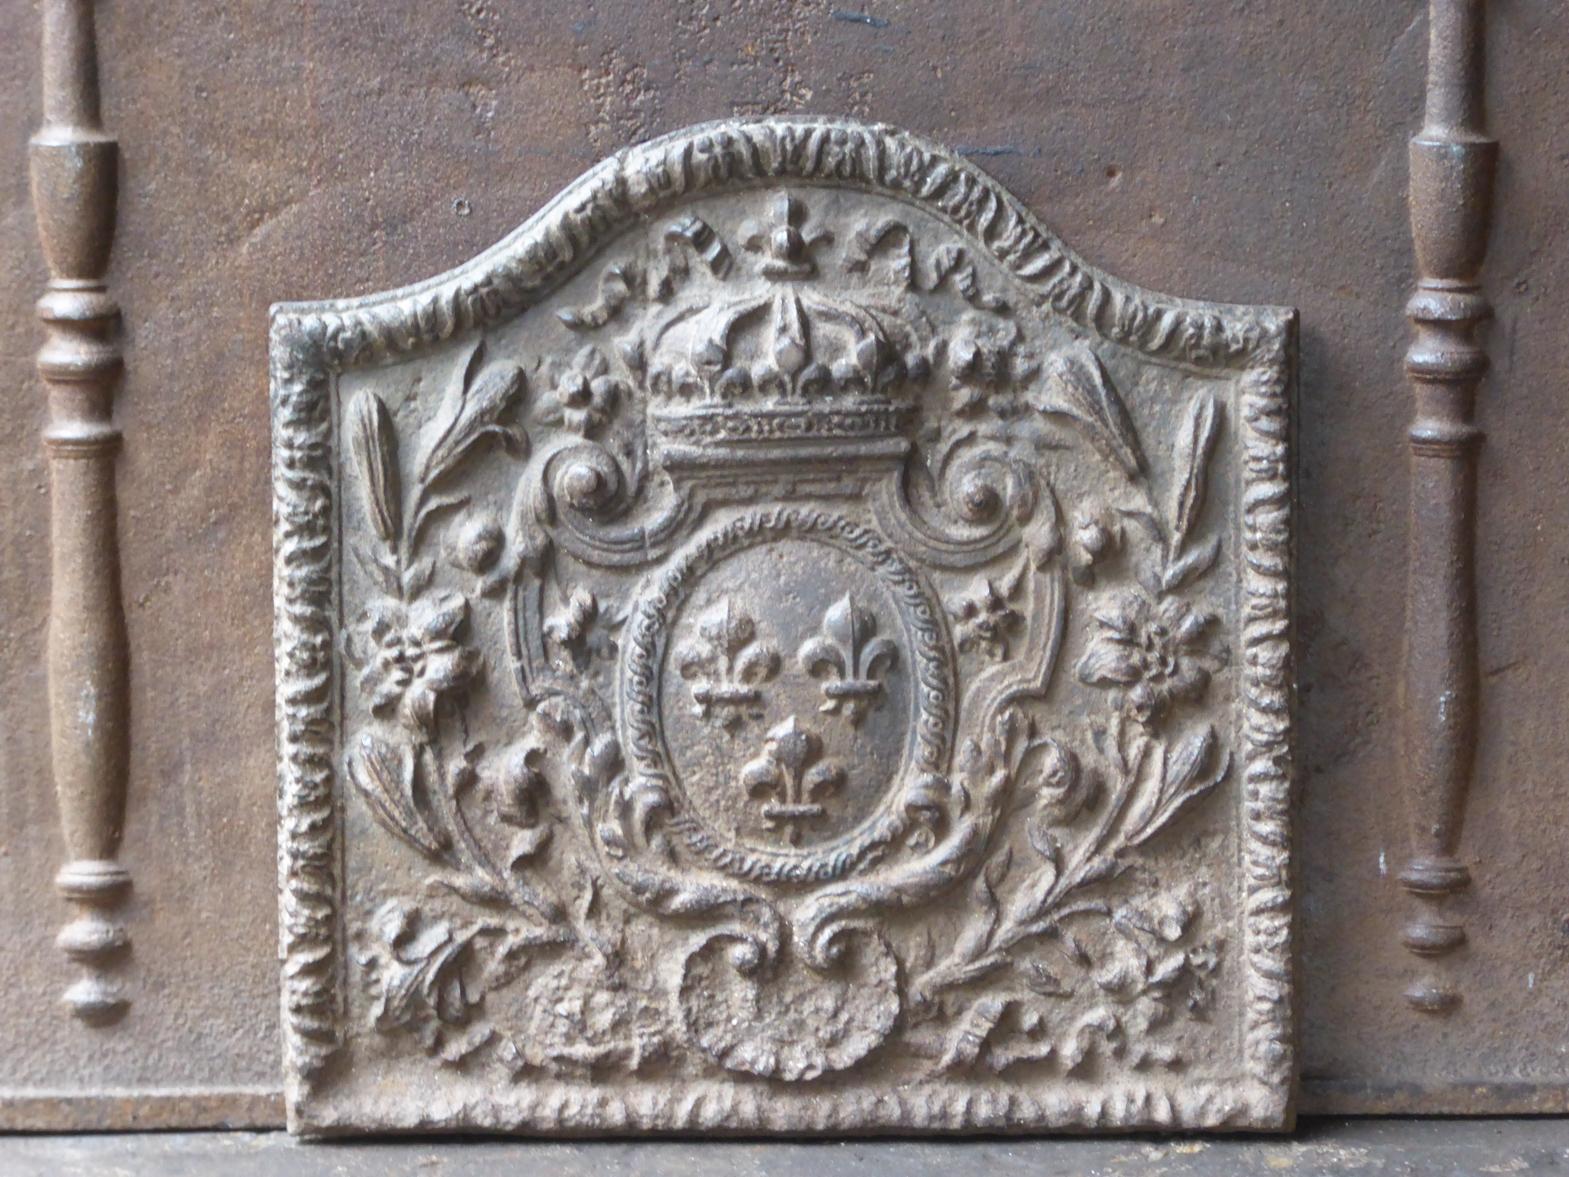 19th century French Napoleon III fireback with the Arms of France. Coat of arms of the House of Bourbon, an originally French royal house that became a major dynasty in Europe. It delivered kings for Spain (Navarra), France, both Sicilies and Parma.